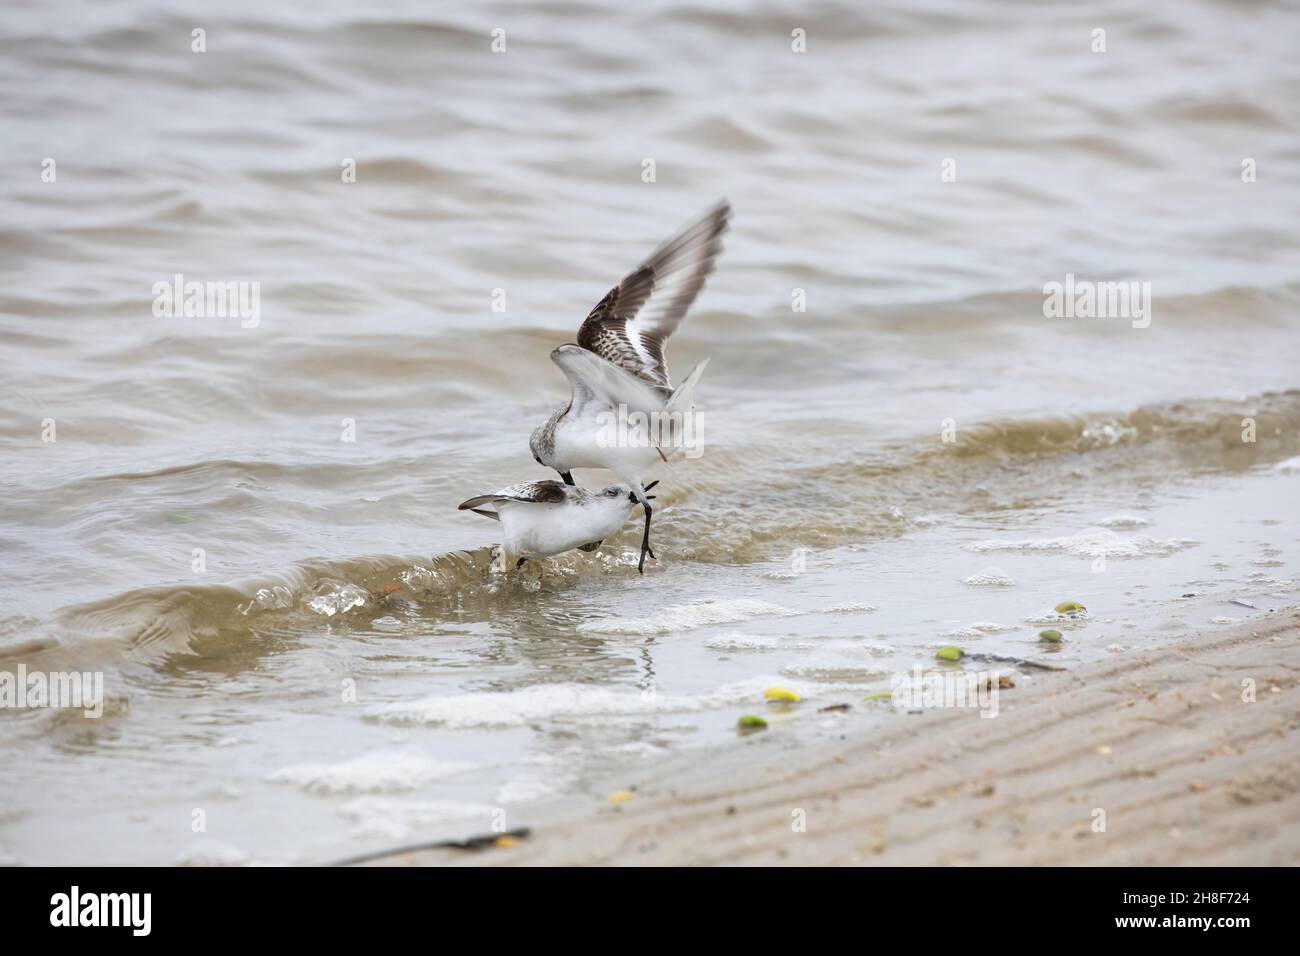 Two sanderlings fighting on the beach at Fort Matanzas Inlet in Fort Matanzas Monument. Stock Photo